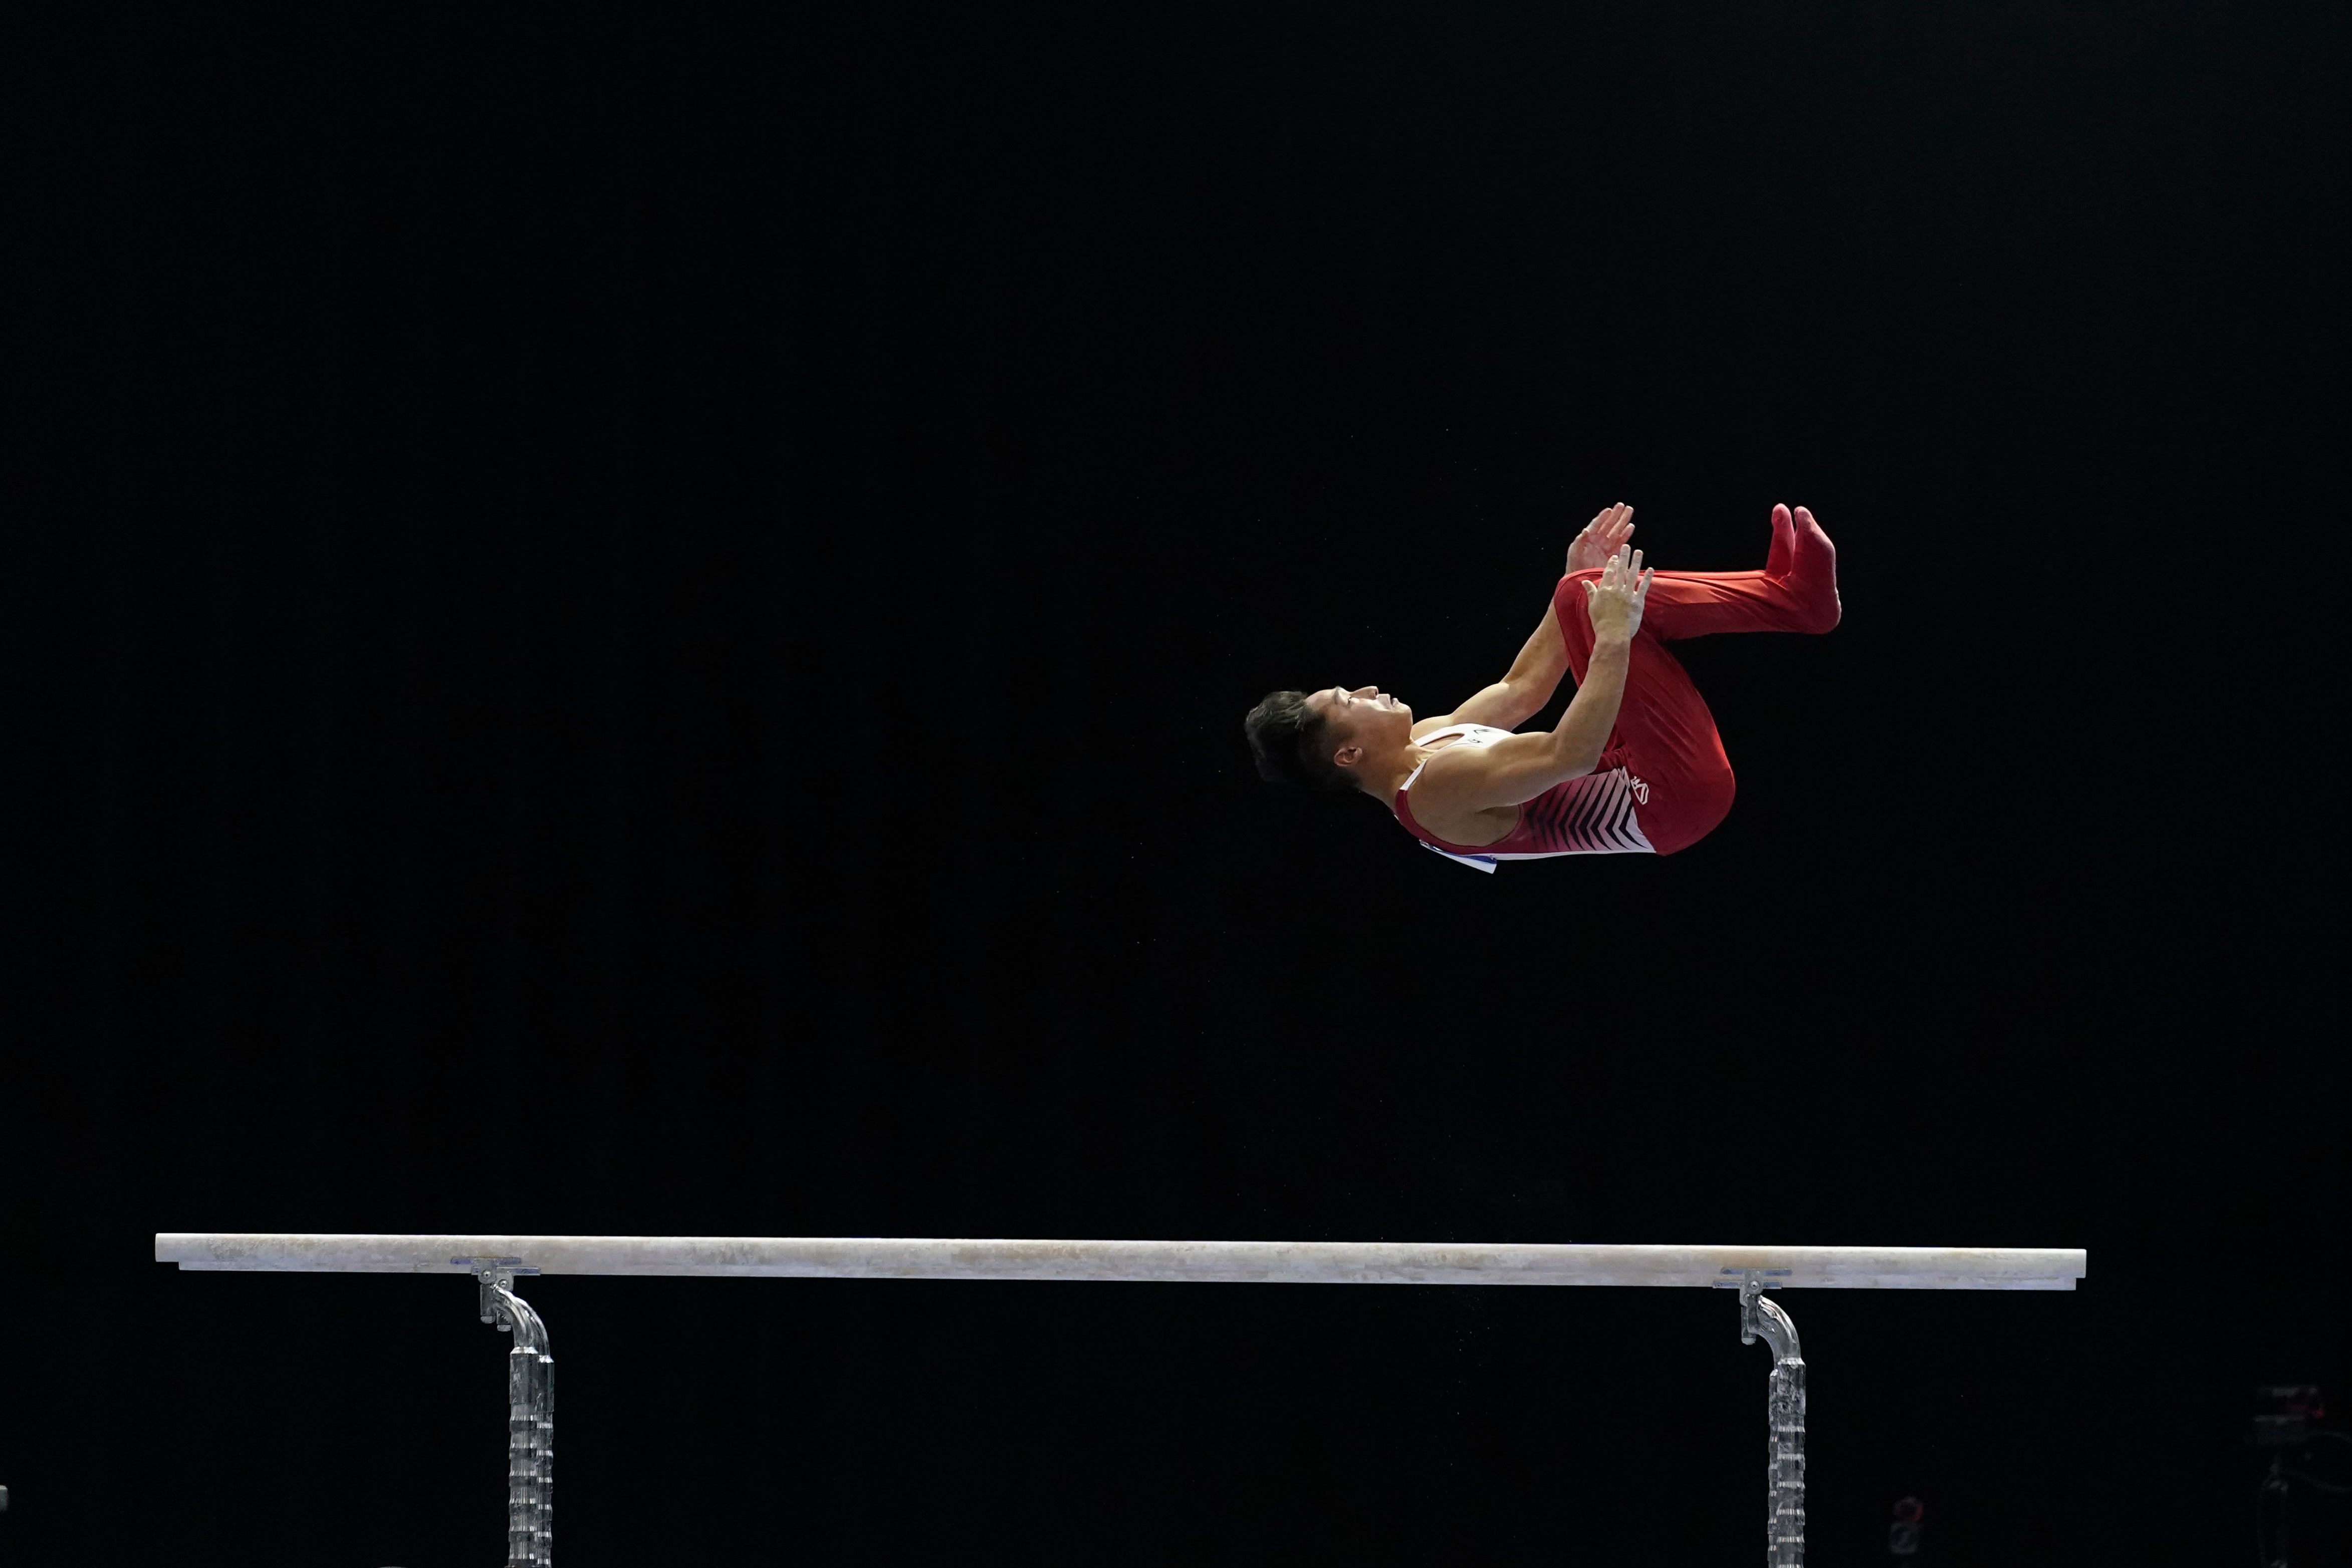 things to know about Olympics gymnastics team member Yul Moldauer